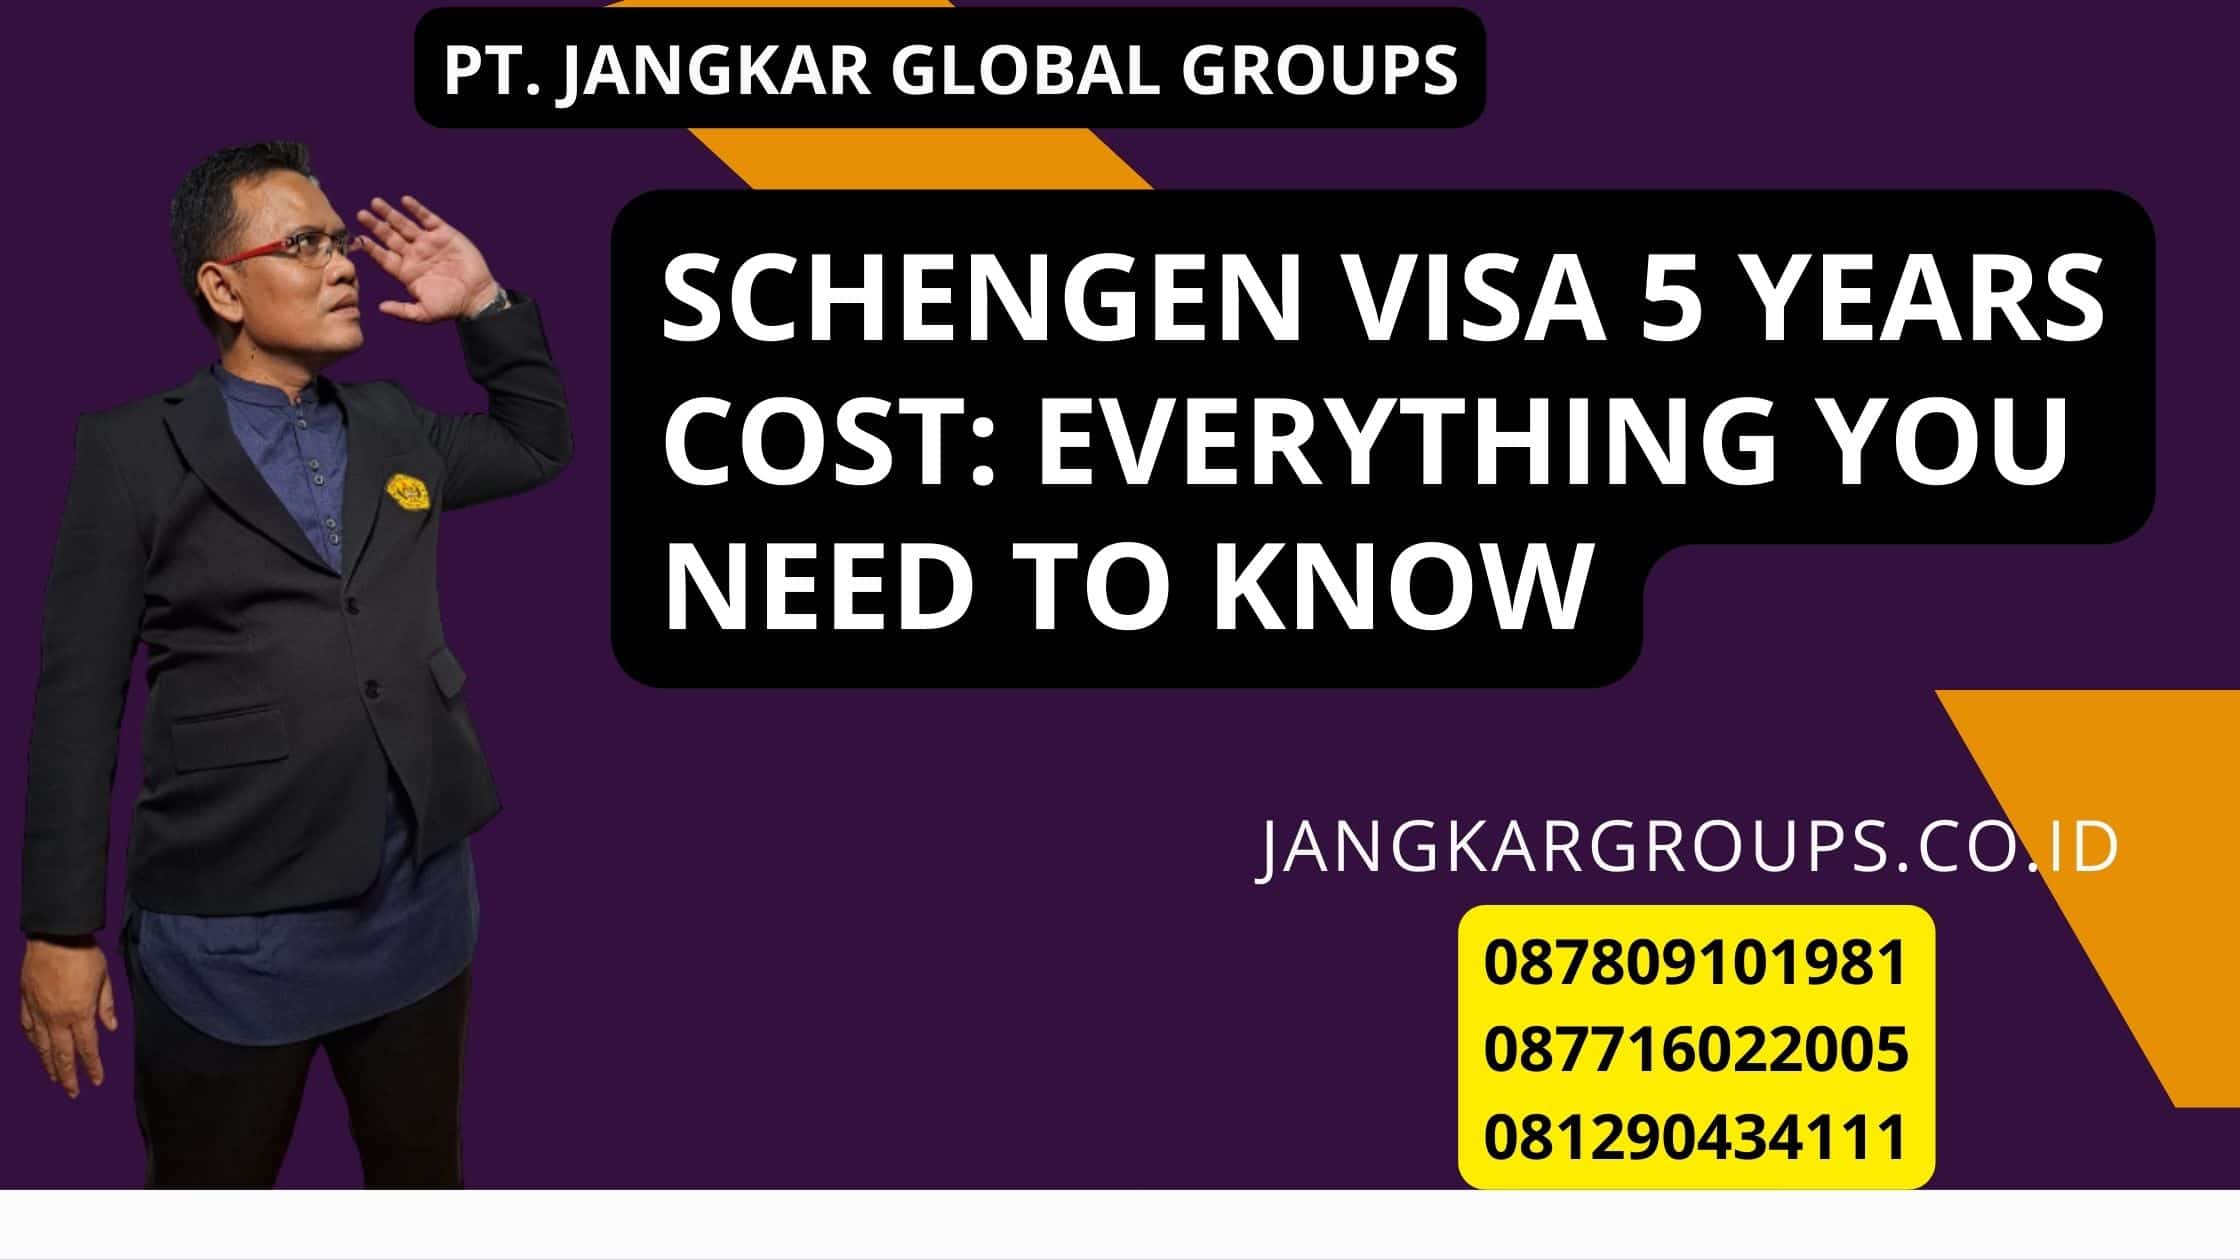 Schengen Visa 5 Years Cost: Everything You Need to Know